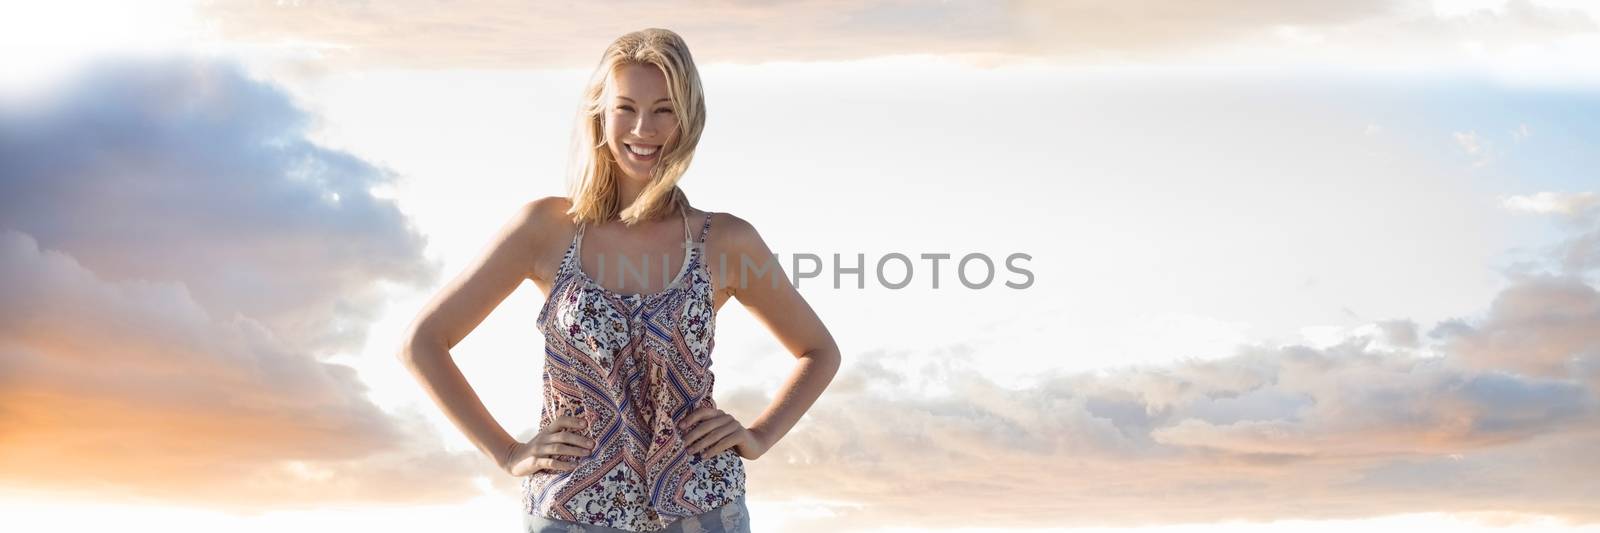 Woman in summer clothes with hands on hips against cloudy sky by Wavebreakmedia